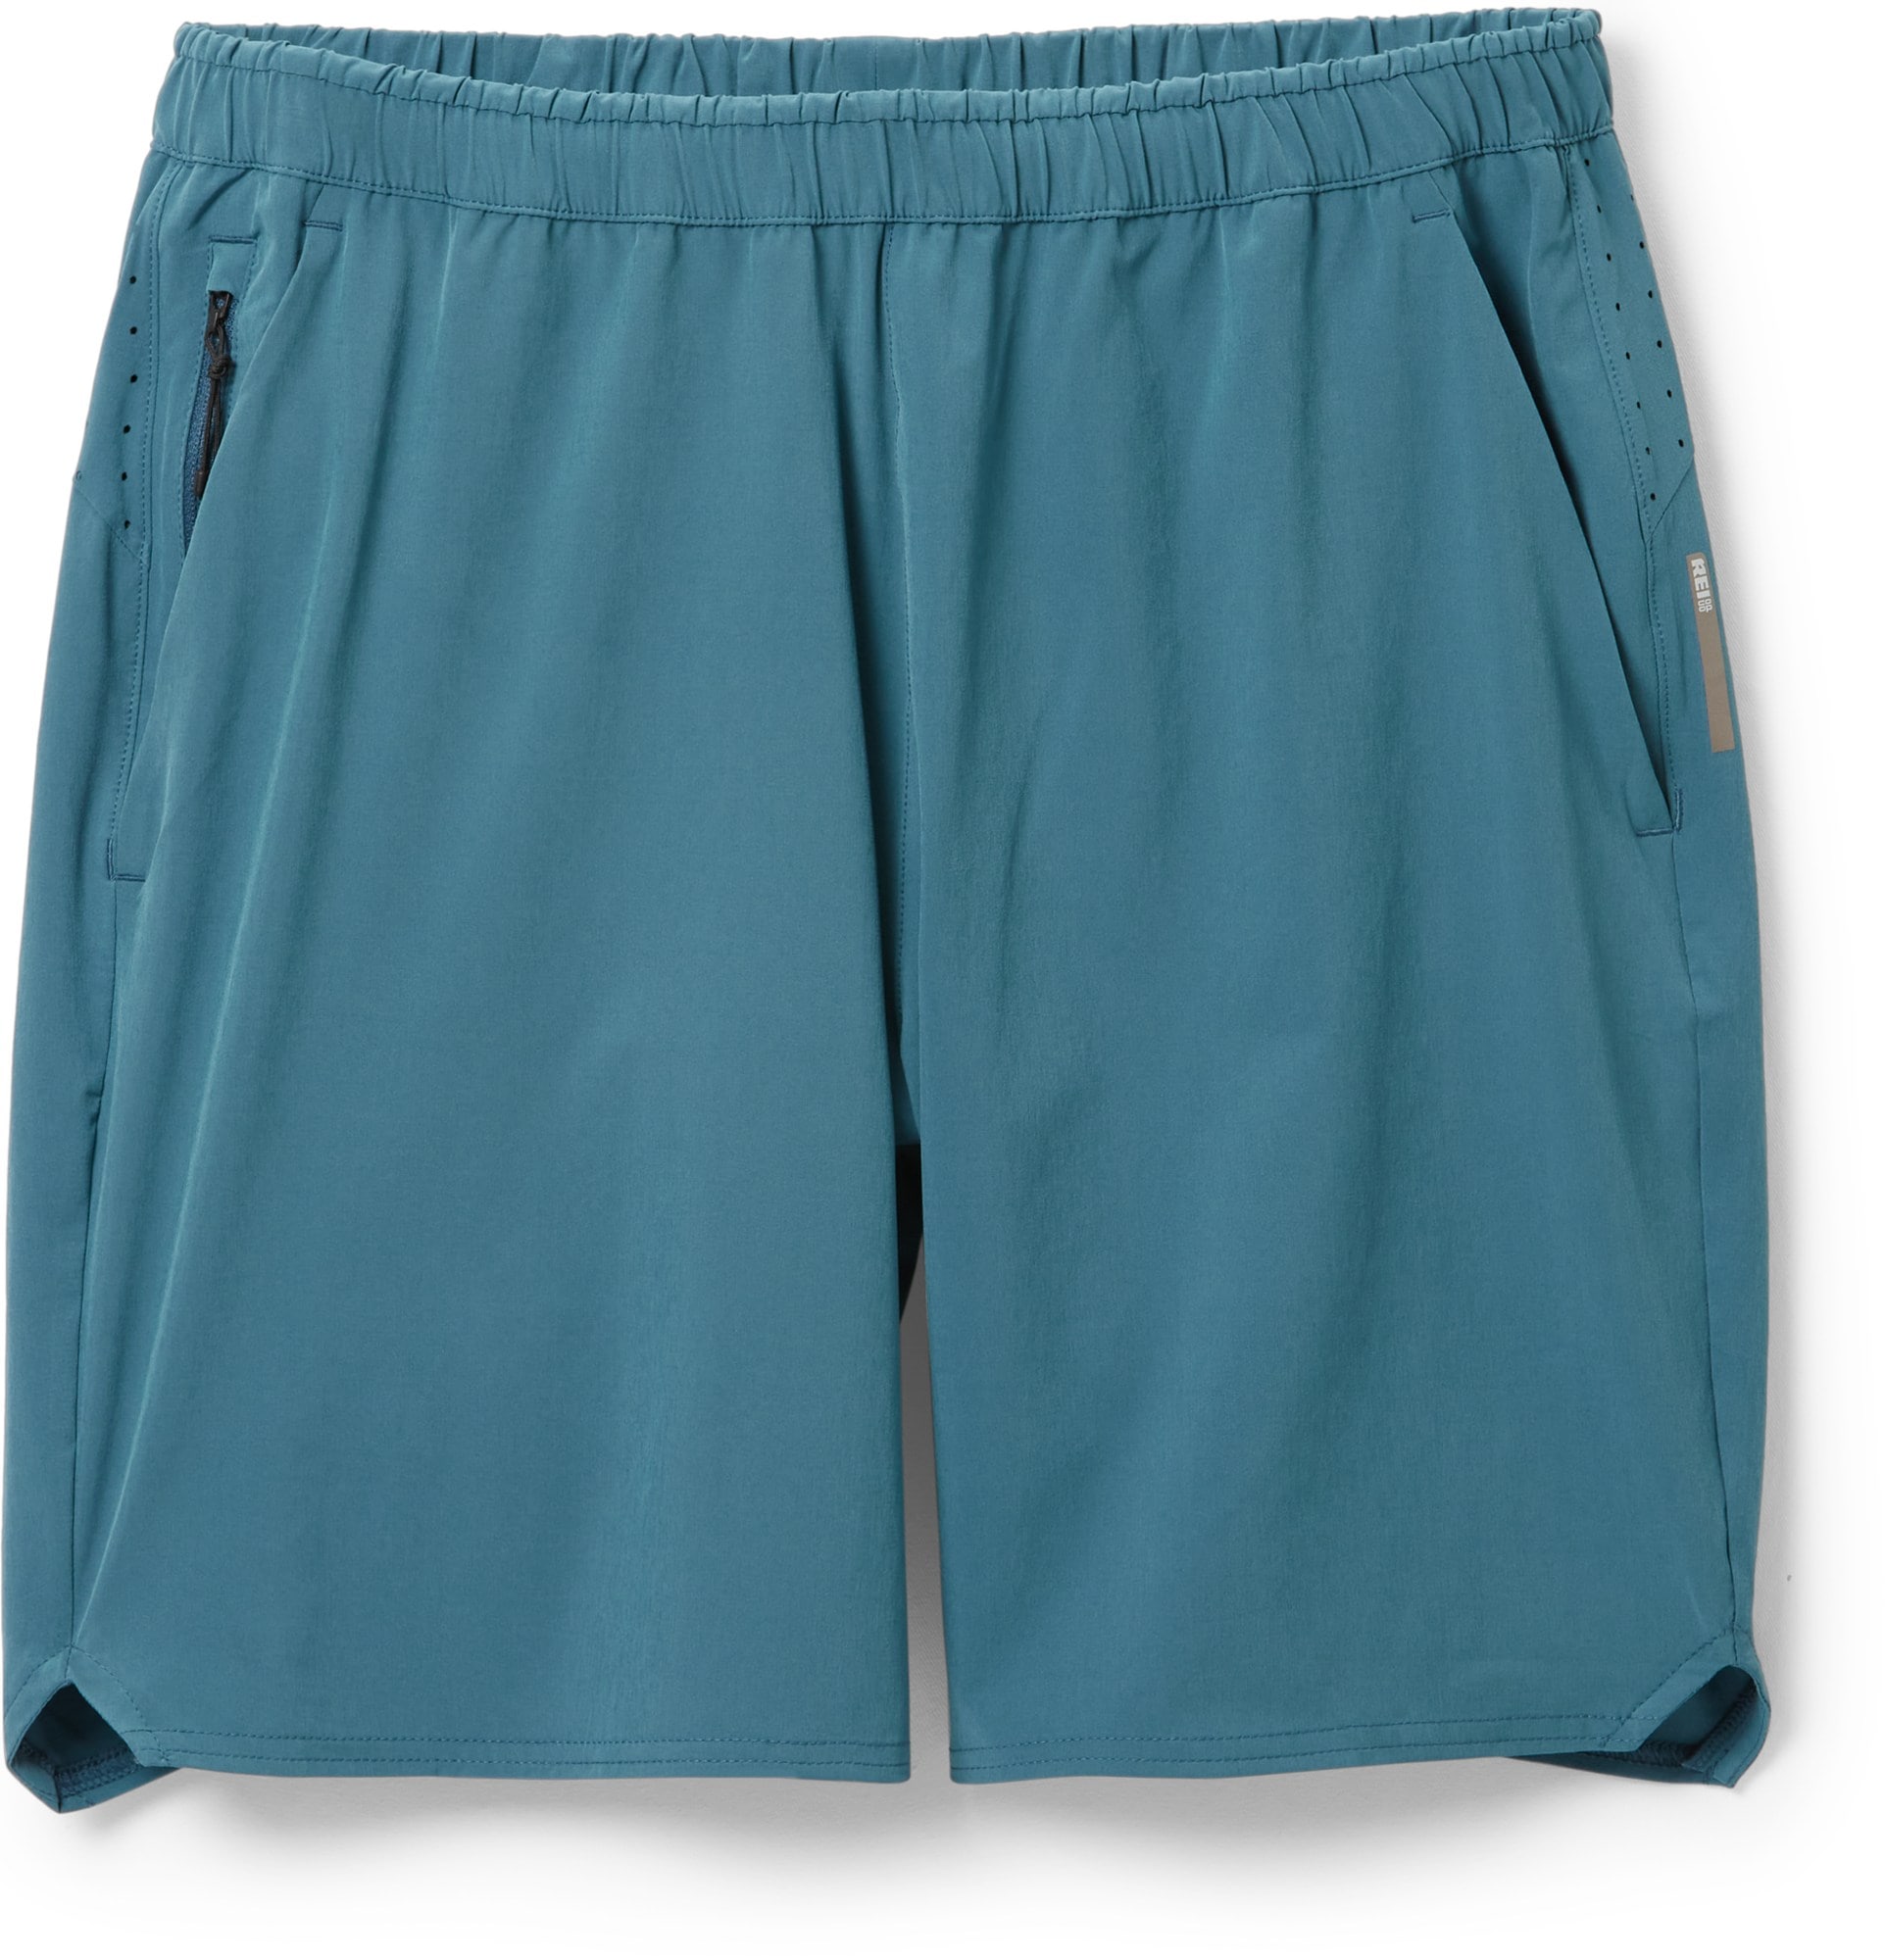 REI Co-op Men's Active Pursuits Shorts (Blue, 7" Inseam) $12.85 w/ Free Store Pickup or Free S&H on $50+